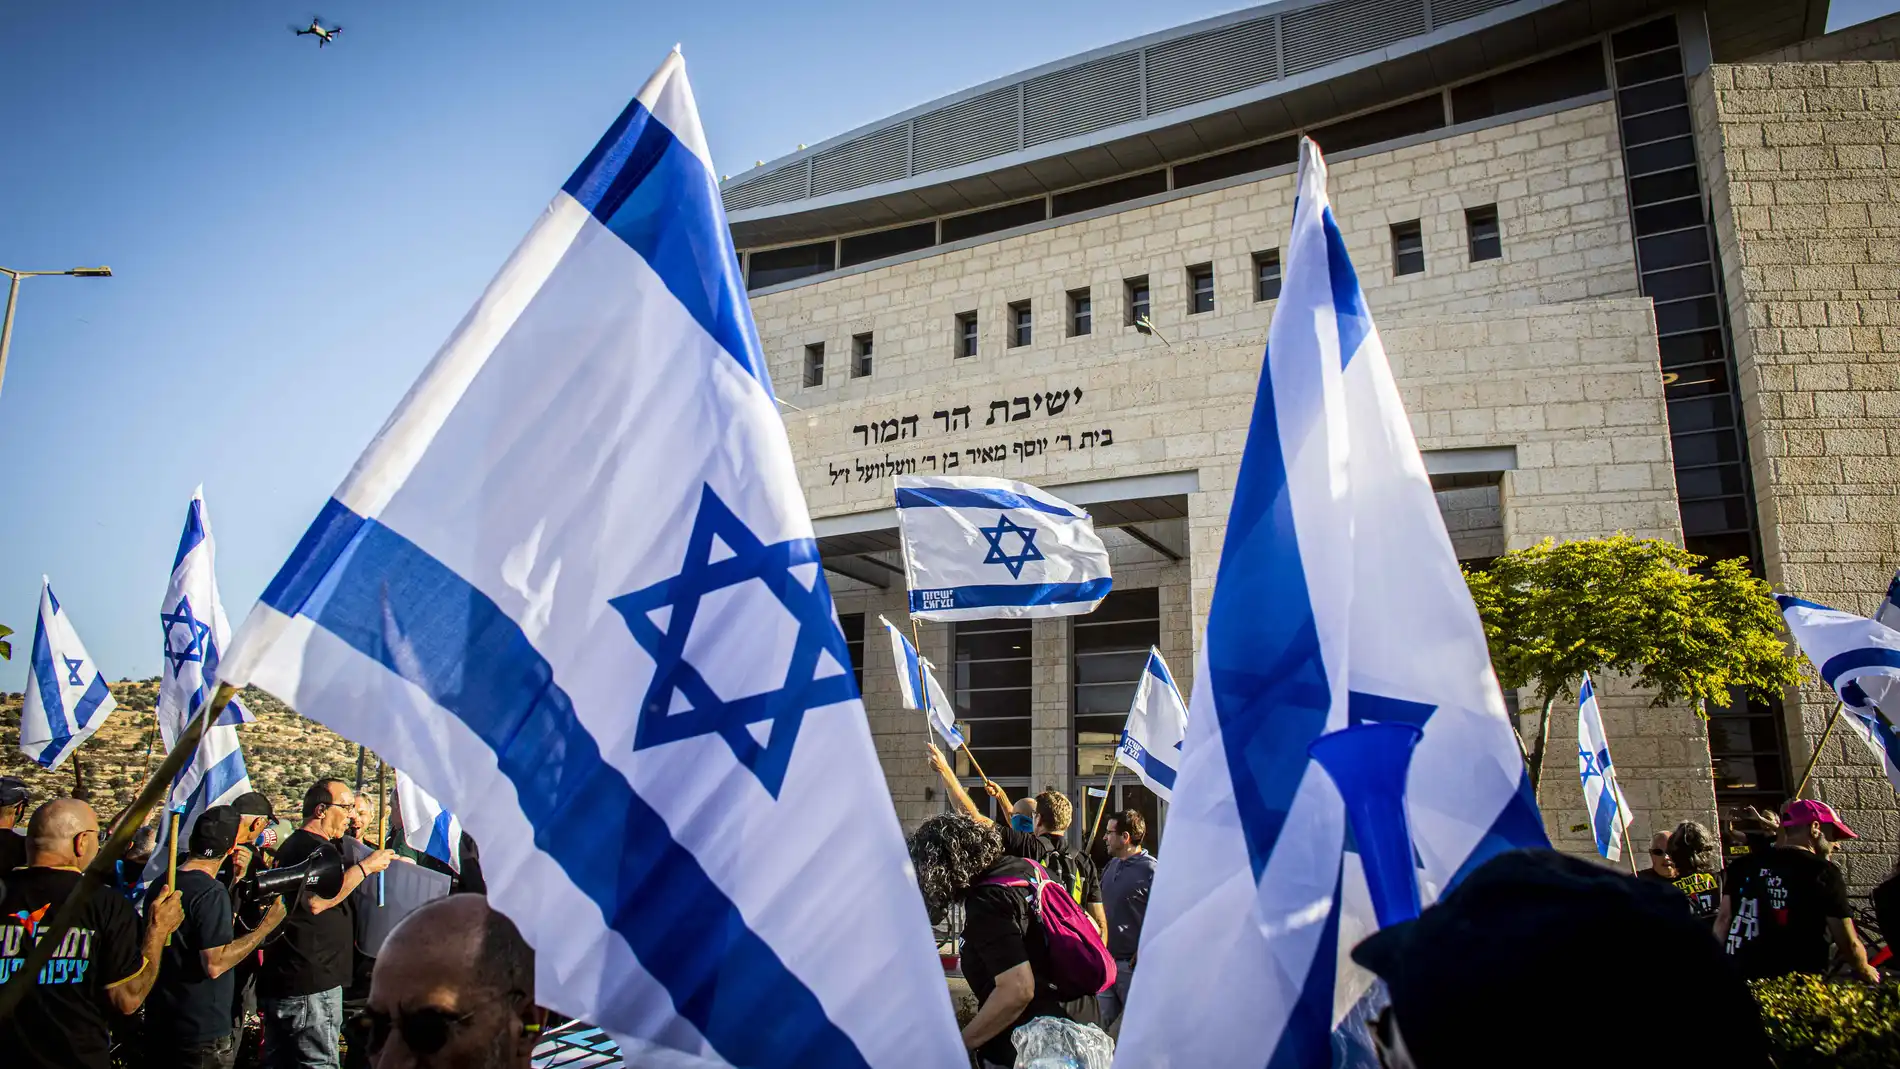 July 5, 2023, Jerusalem, Israel: Anti reform protestors wave Israeli flags during a demonstration. Over 200 protesters against the government's judicial overhaul demonstrated in front of Har Hamor yeshiva headed by Rabbi Zvi Tau, the protesters said that the Yeshiva, symbolizes the messianic stream that is leading the regime coup. 05/07/2023